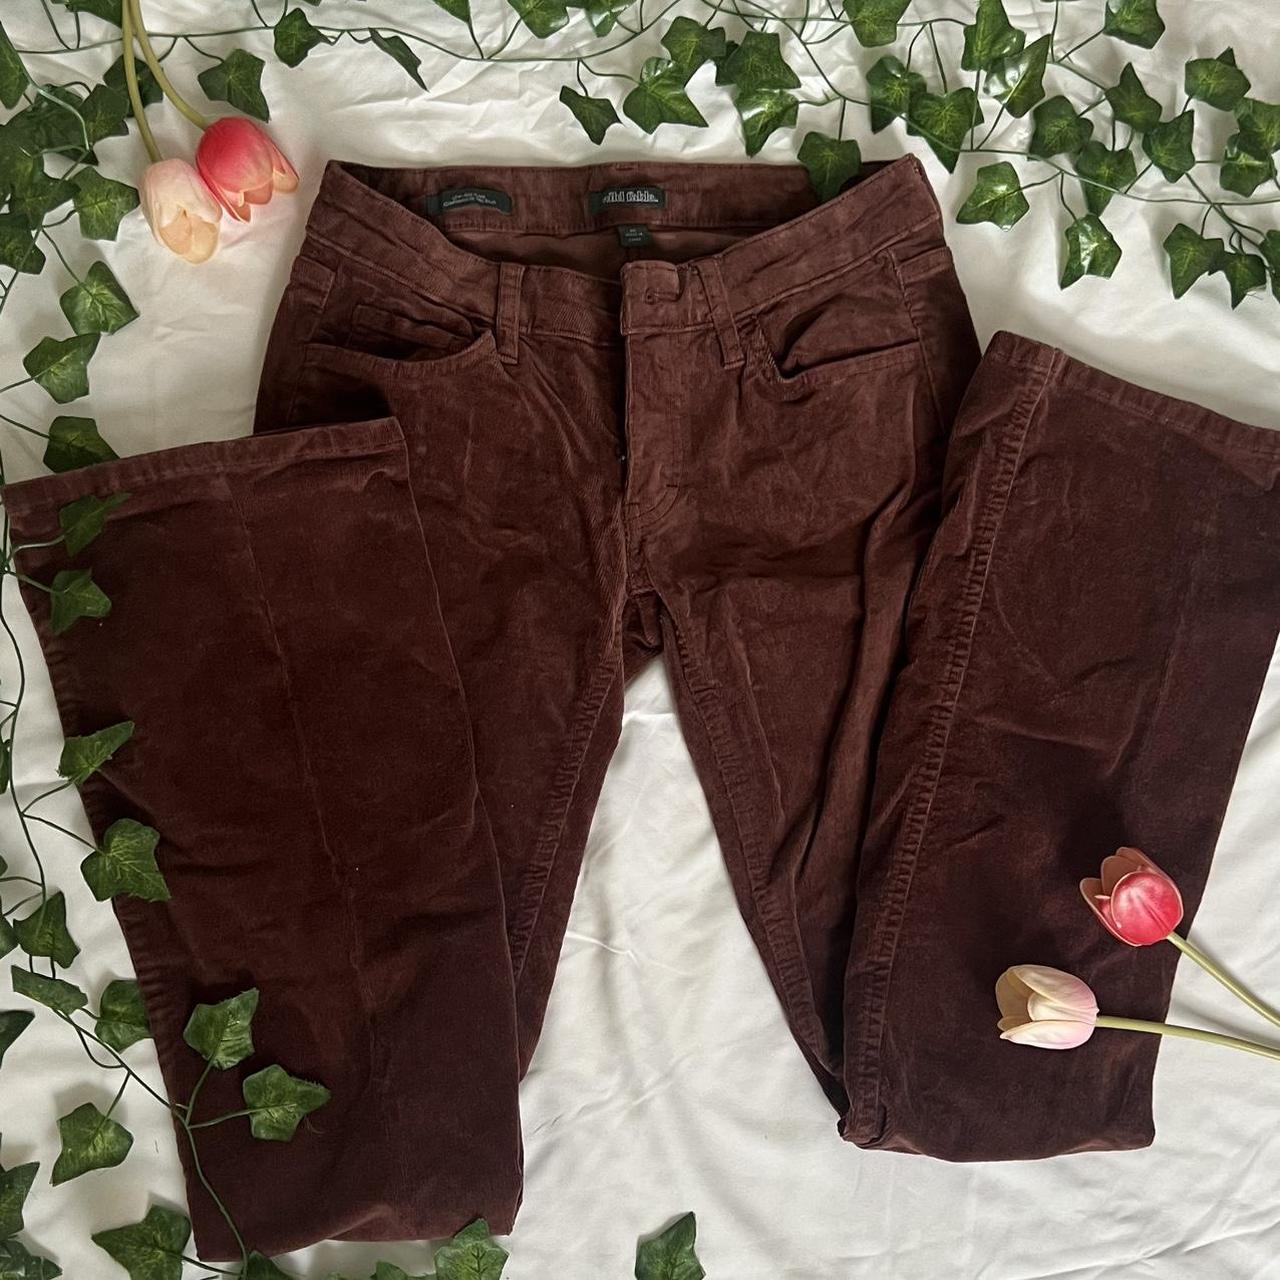  other stories corduroy mini flare pants in size 2 - Depop